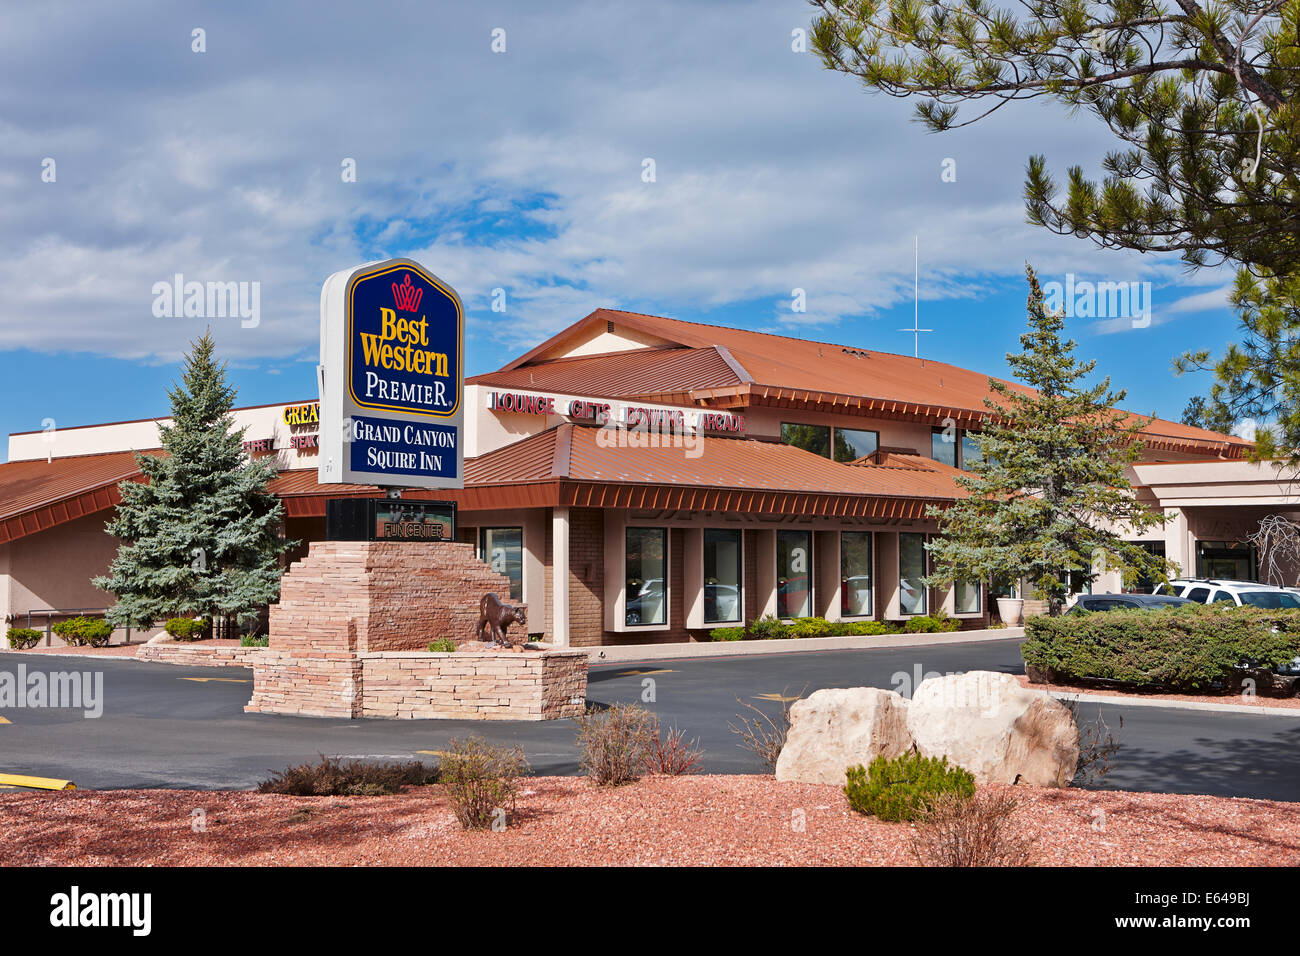 Exterior view of Best Western Grand Canyon Squire Inn hotel building in the Grand Canyon Village. Arizona, USA. Stock Photo